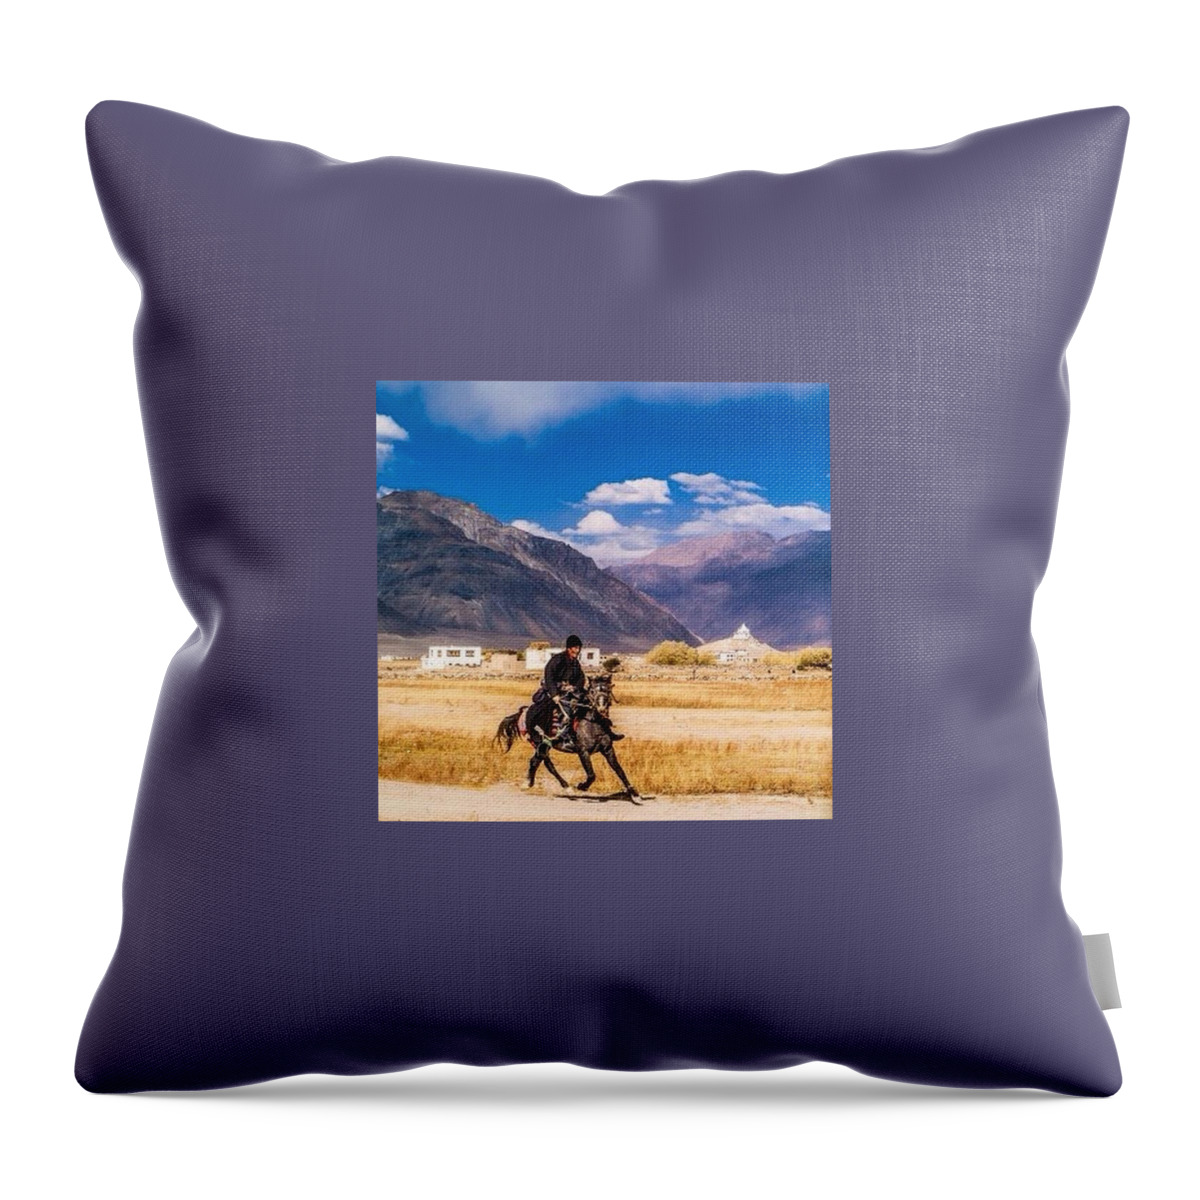 Beautiful Throw Pillow featuring the photograph The Horse Rider, Zanskar by Aleck Cartwright